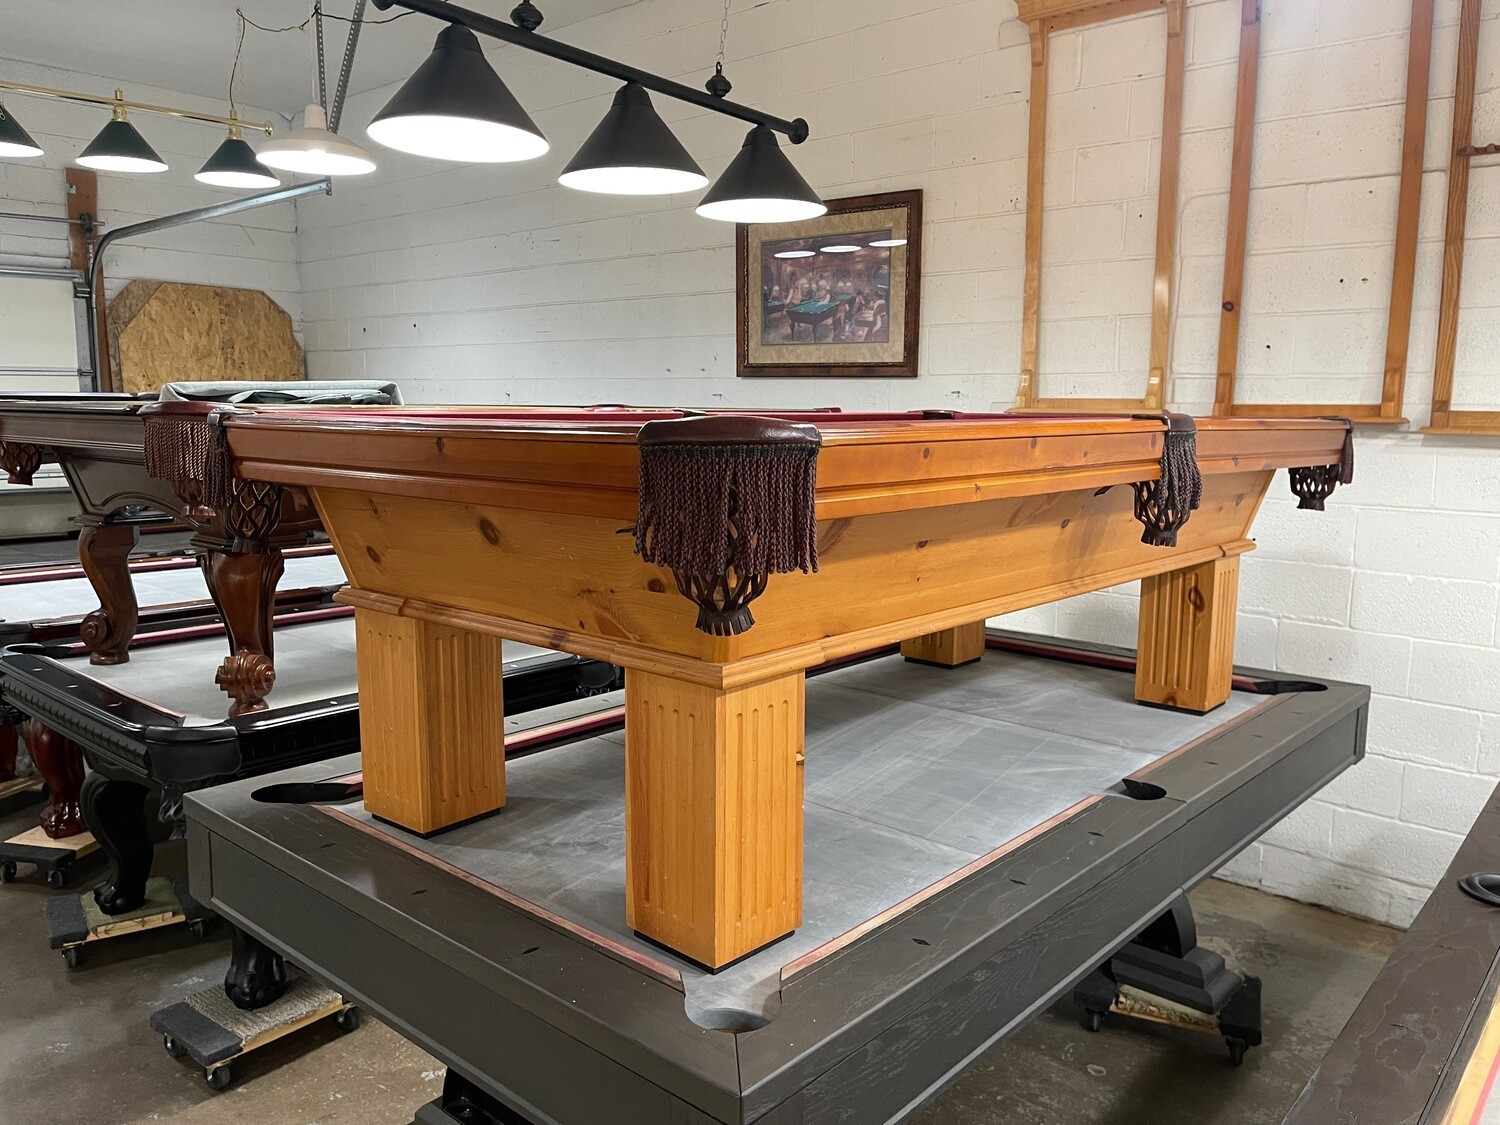 8' Olhausen Southern Pool Table - Knotty Pine